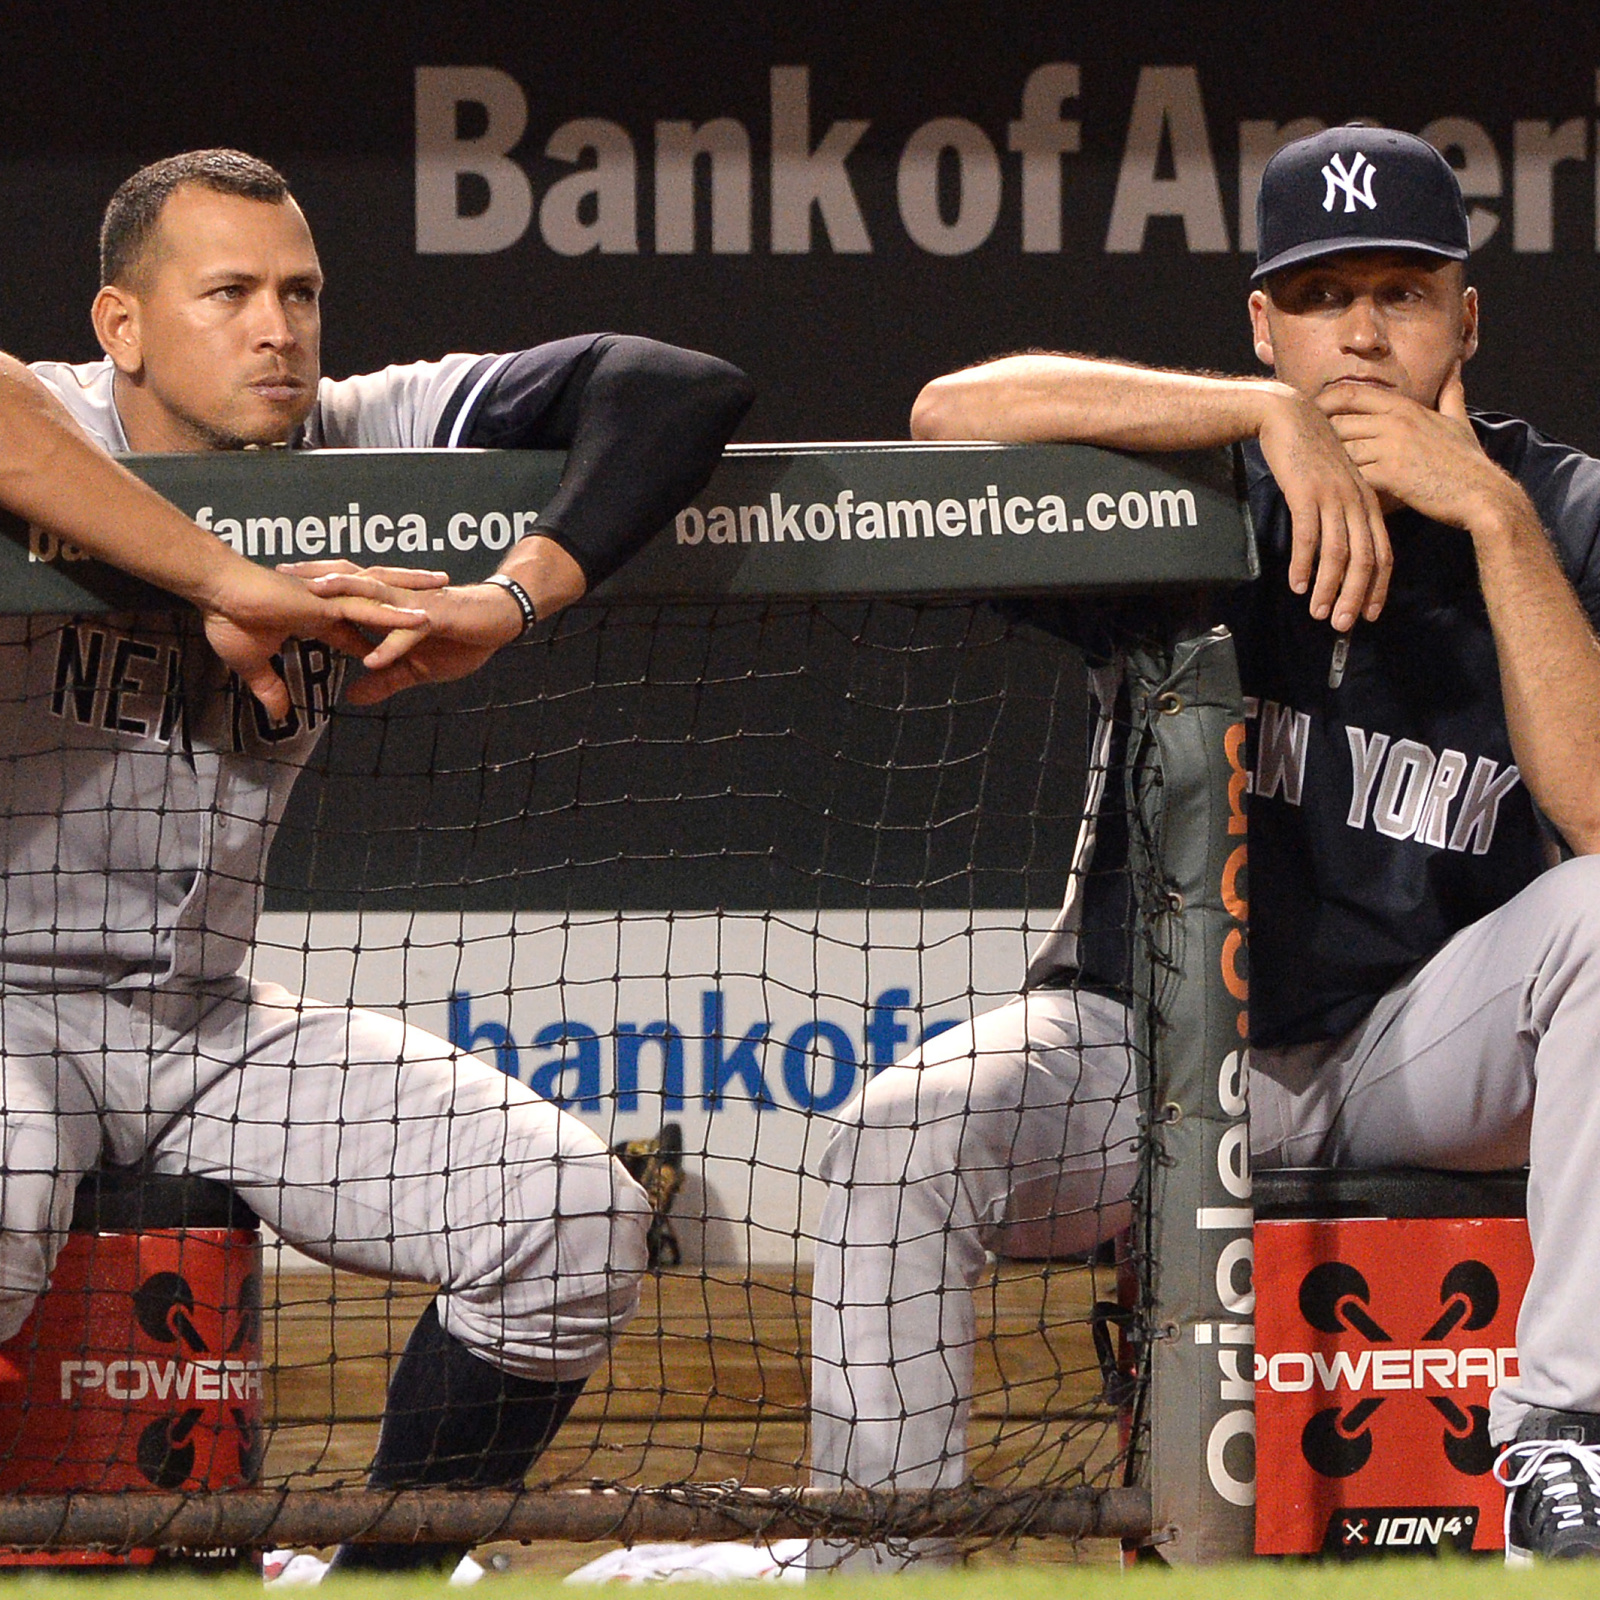 Alex Rodriguez and Derek Jeter's Friendship Ended After This 2001